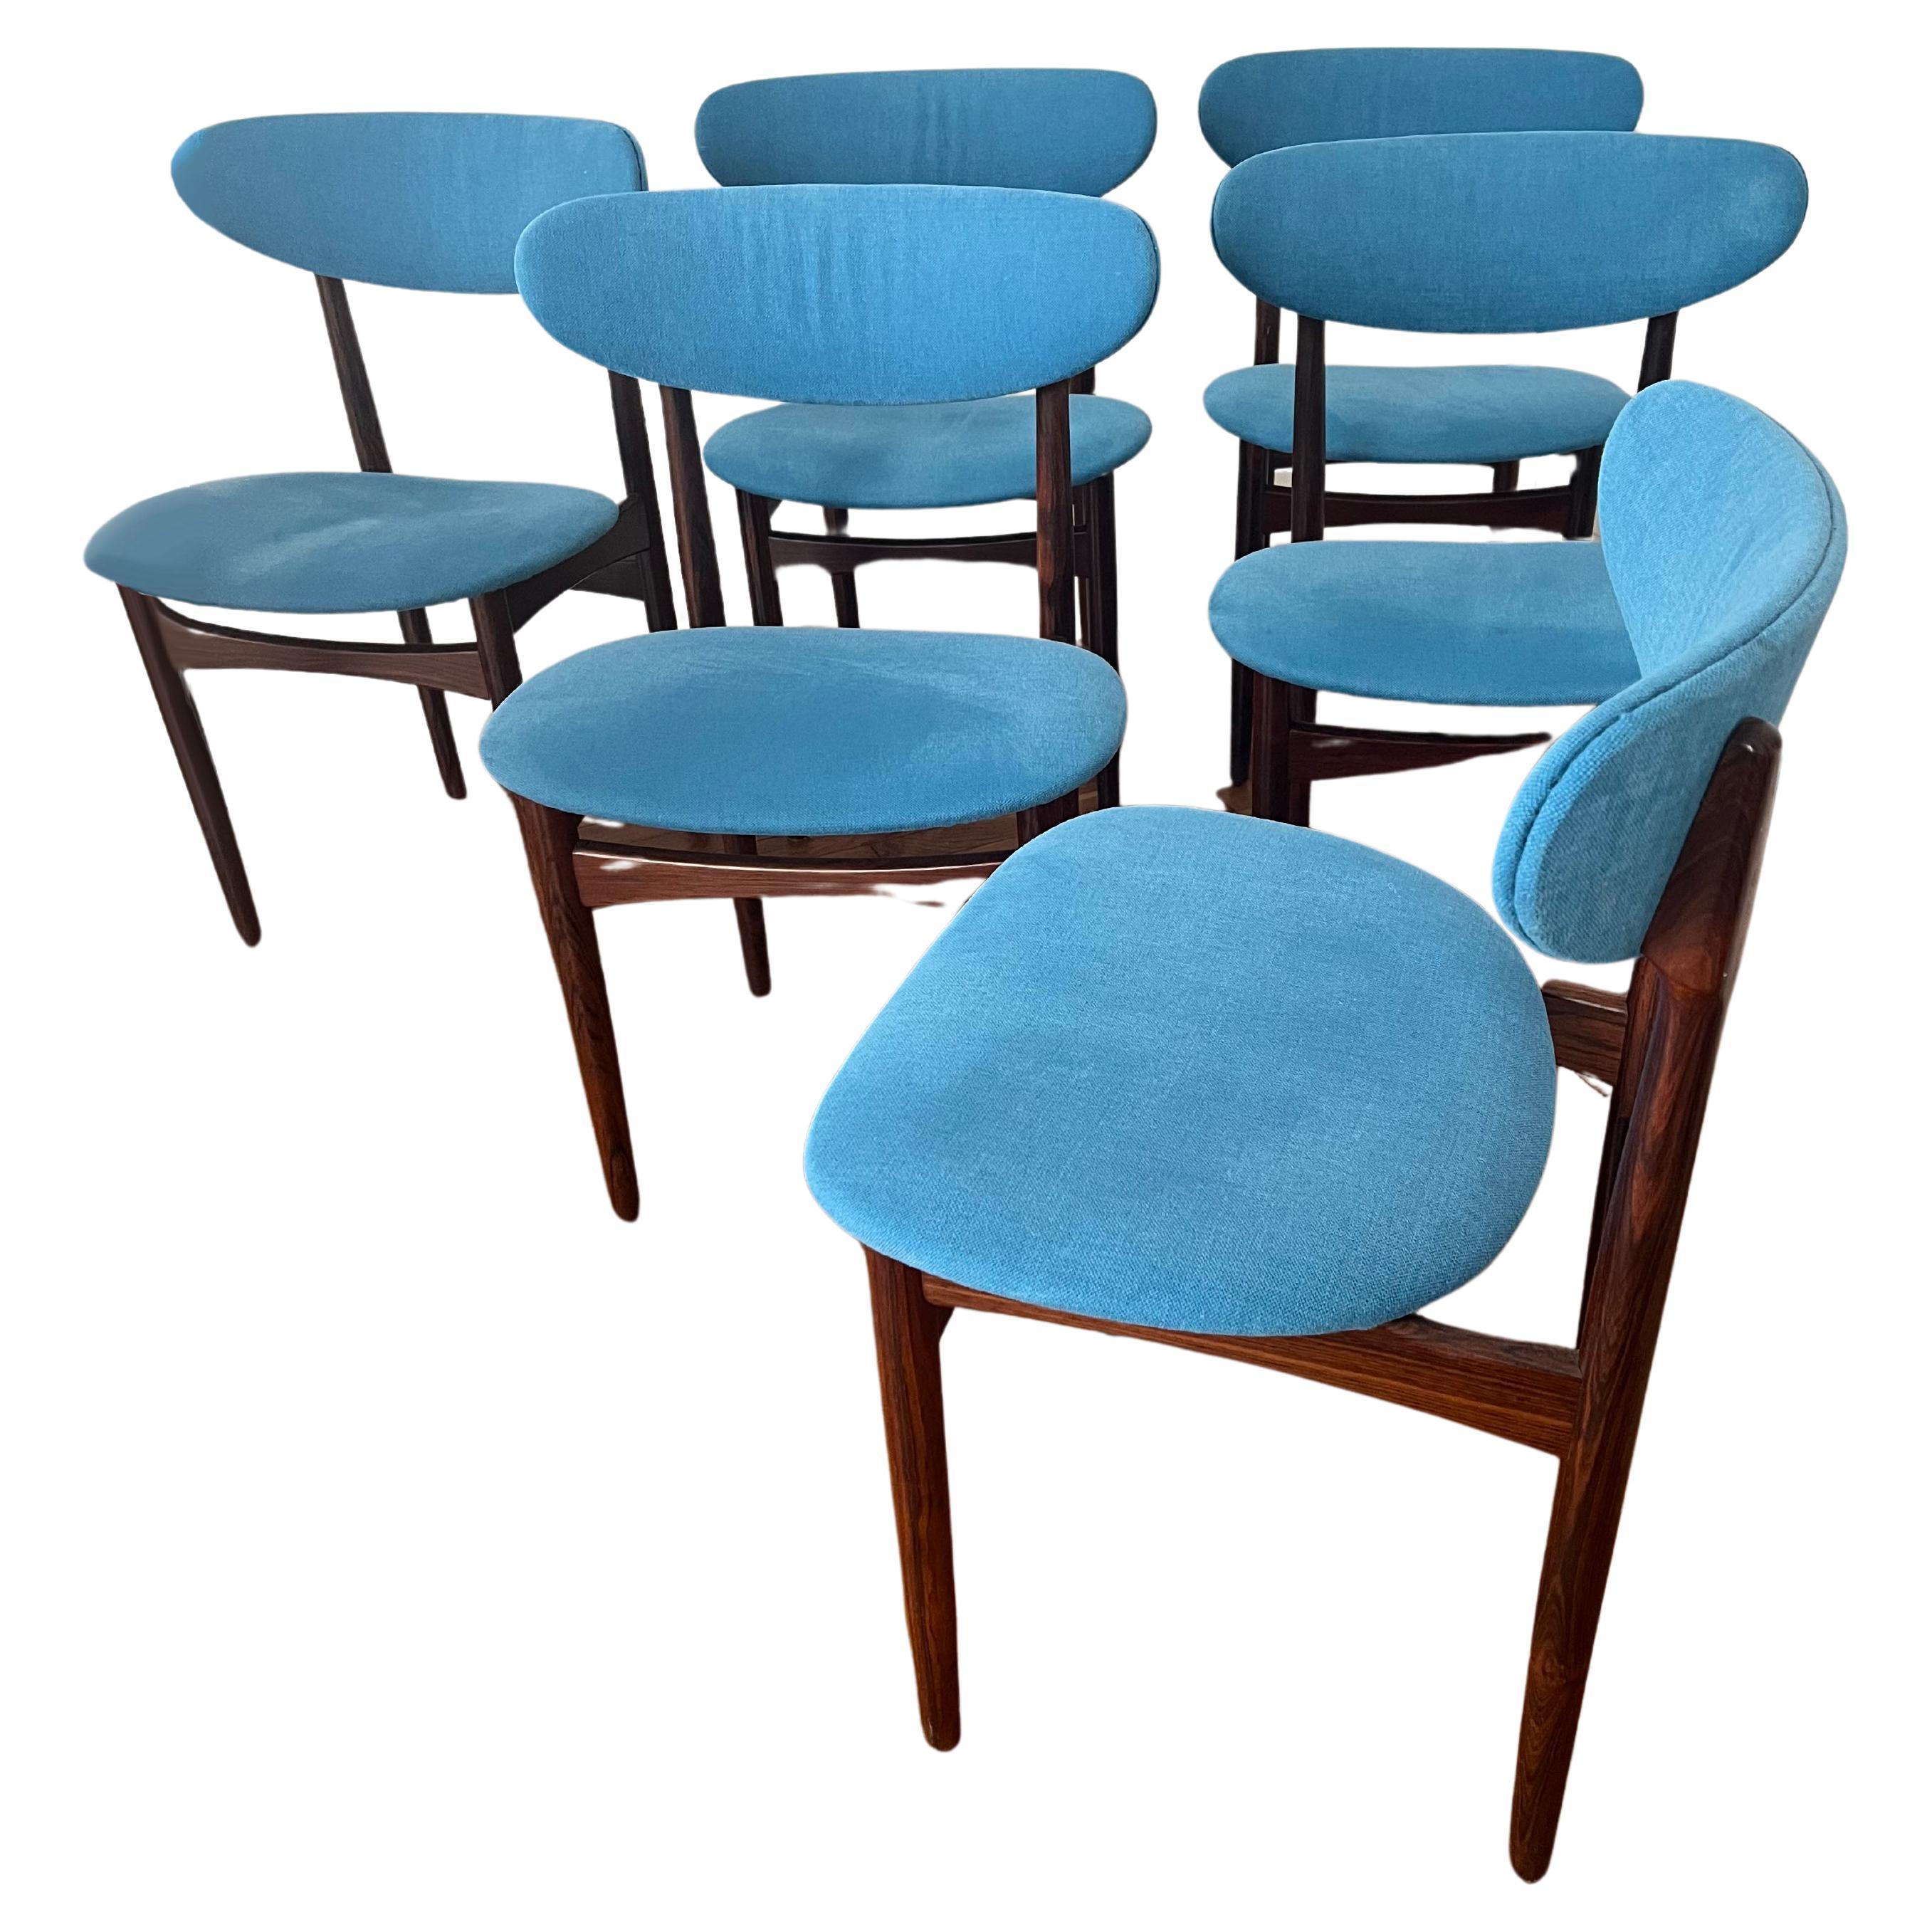 Kofod Larsen  6 chairs  Rio rosewood and blue fabric Circa 1971 For Sale